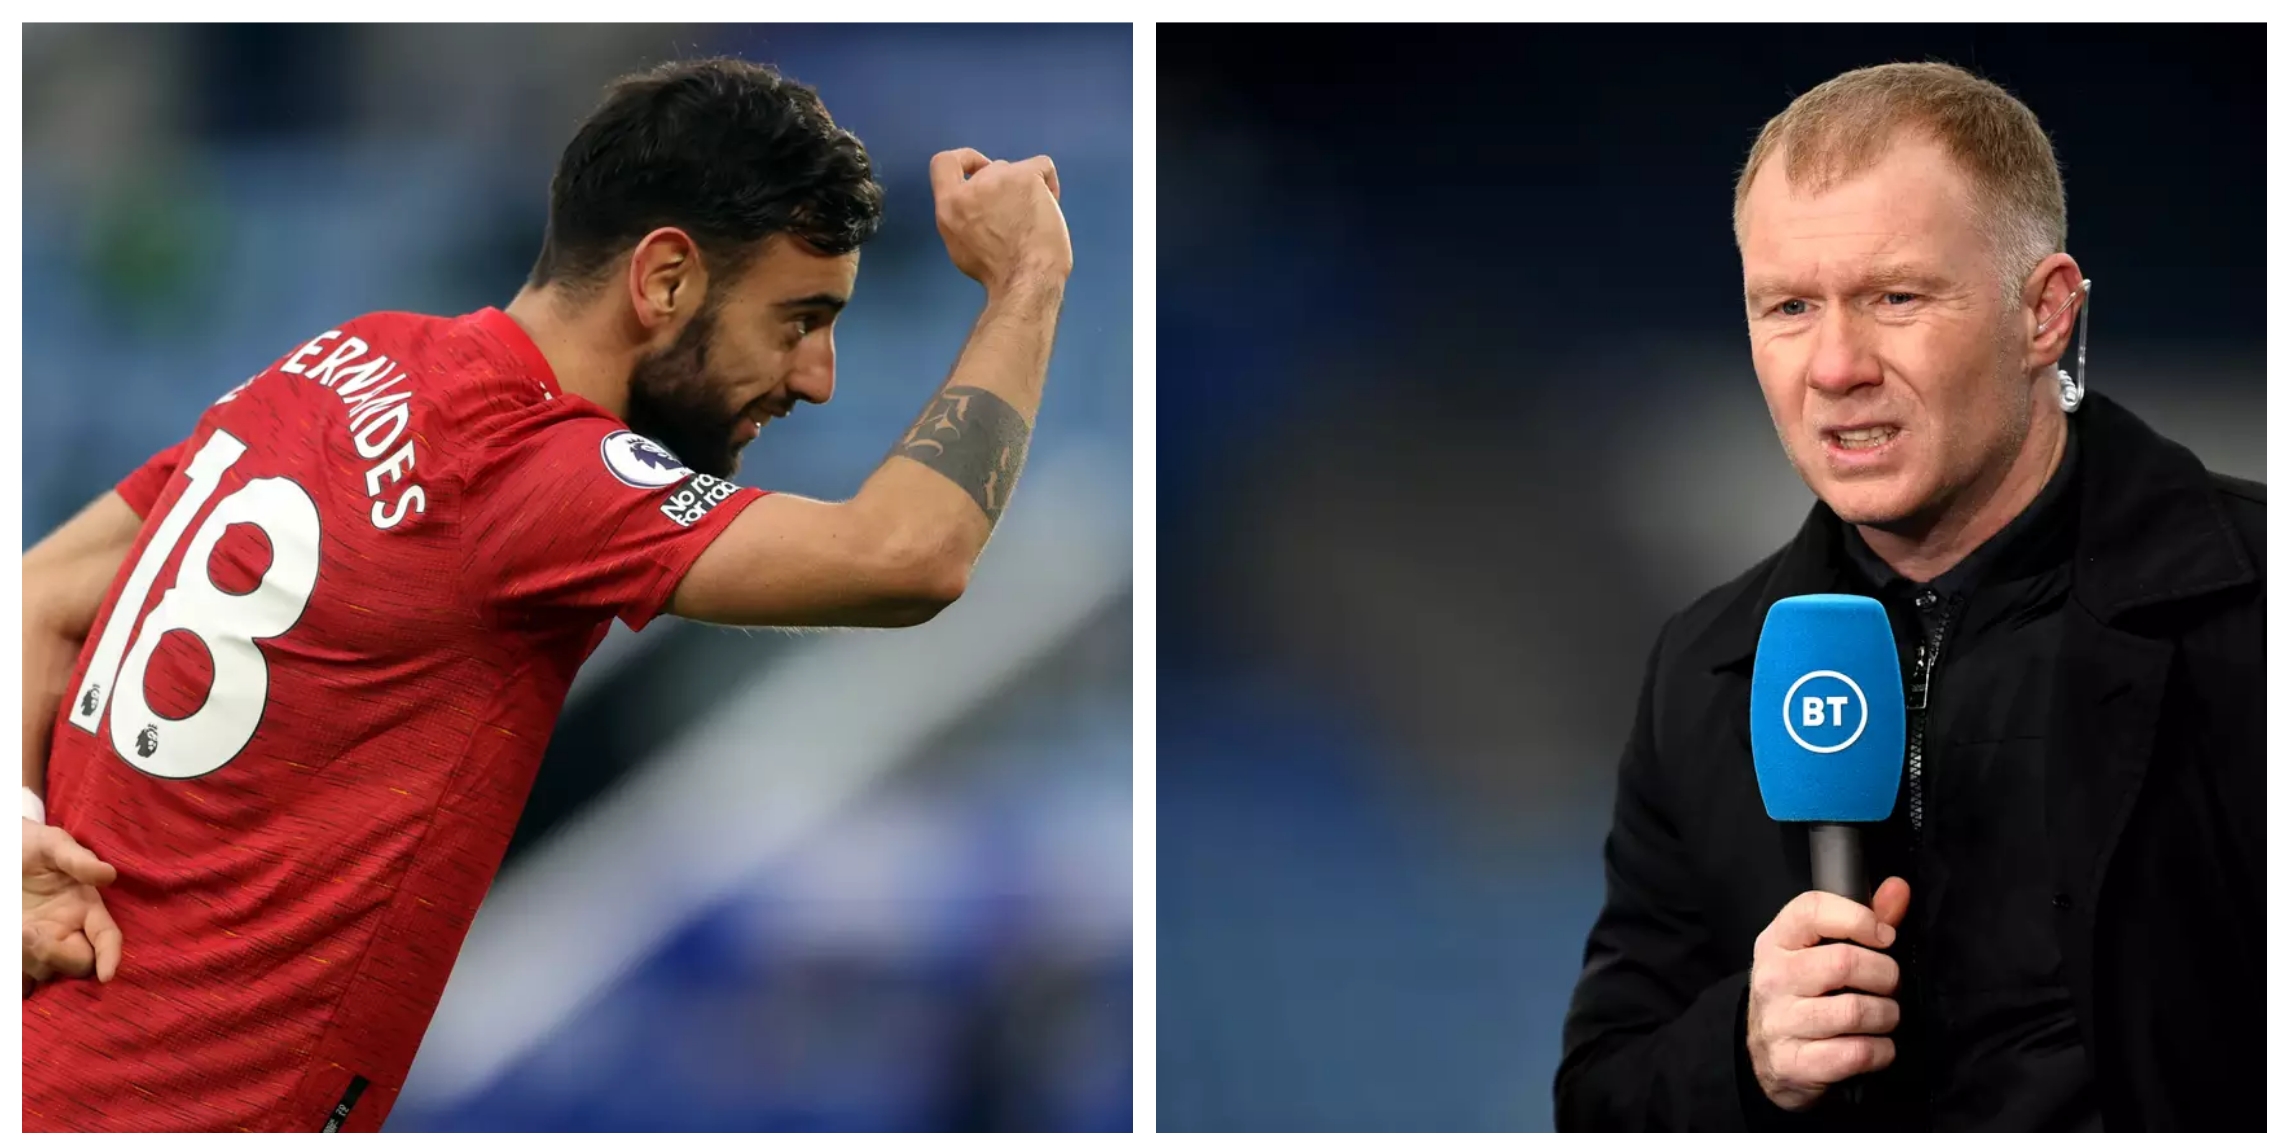 Paul Scholes explains why Bruno Fernandes is a better player than he ever was